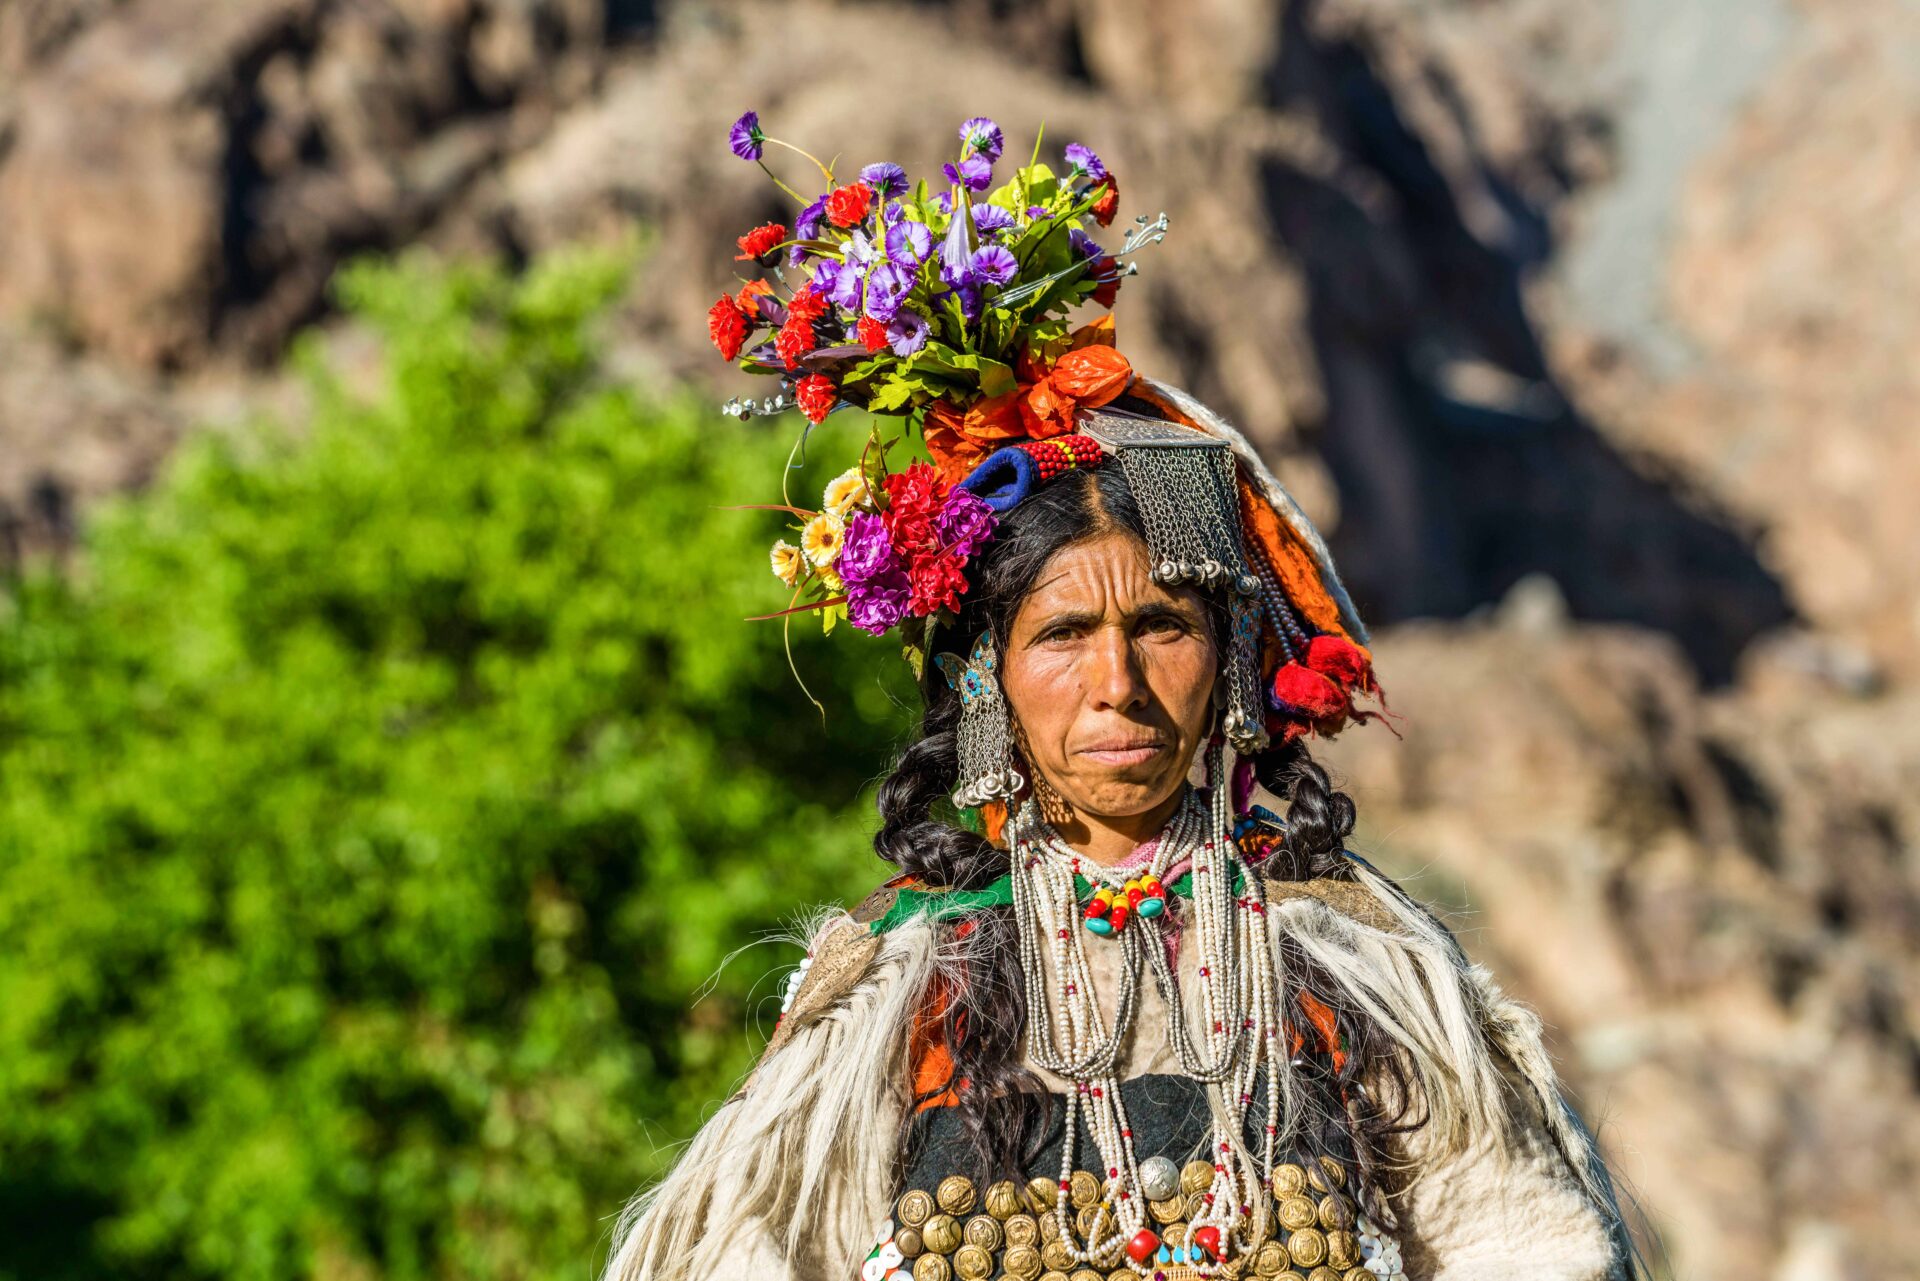 Portrait of a woman in a colorful Brokpa headdress topped with purple and red flowers.